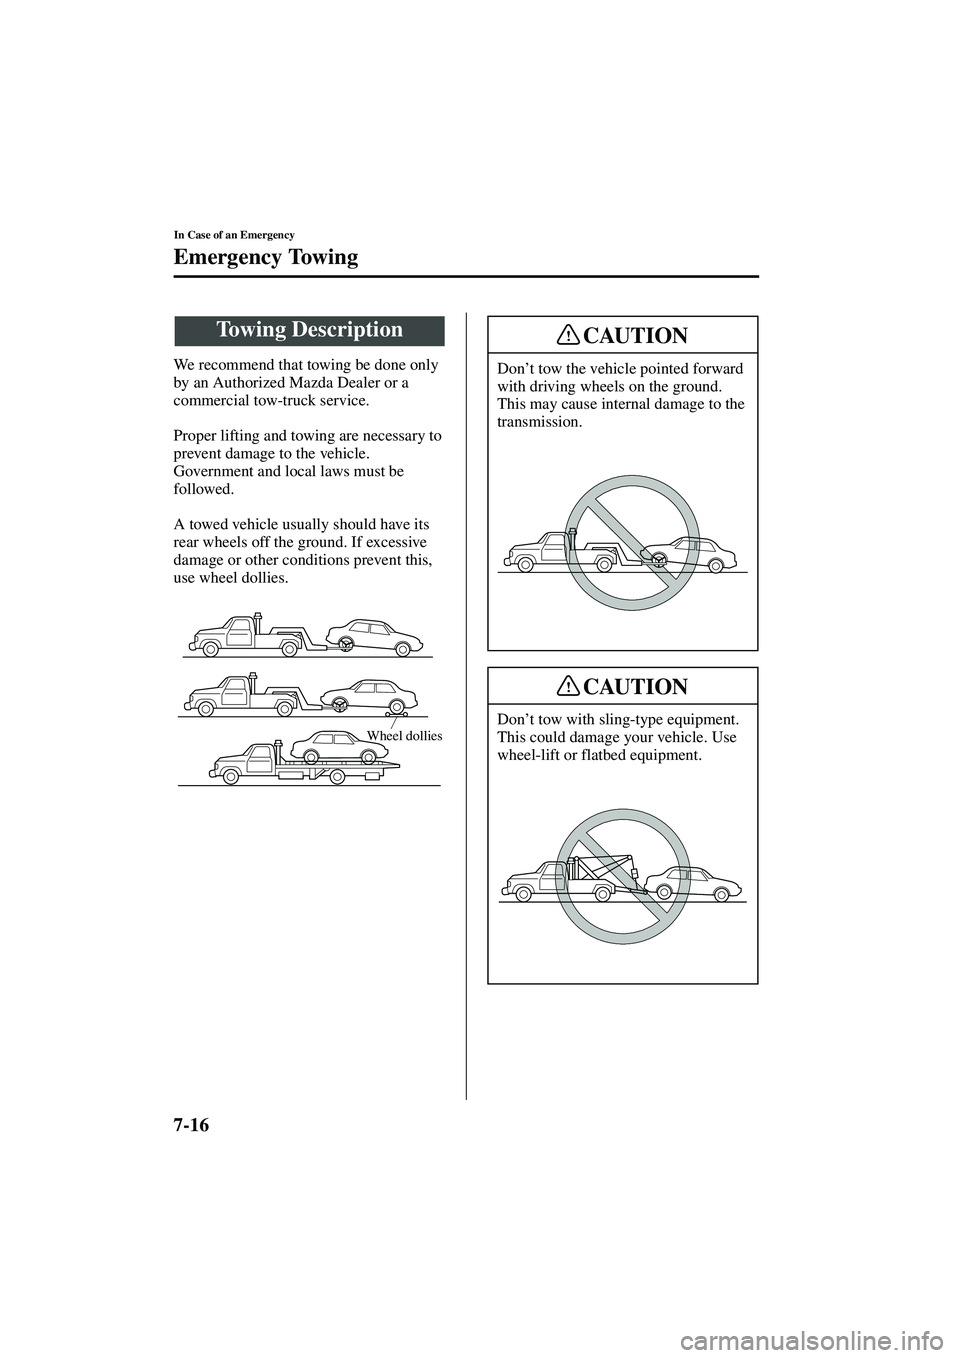 MAZDA MODEL MX-5 MIATA 2004  Owners Manual 7-16
In Case of an Emergency
Form No. 8S15-EA-03G
Emergency Towing
We recommend that towing be done only 
by an Authorized Mazda Dealer or a 
commercial tow-truck service.
Proper lifting and towing ar